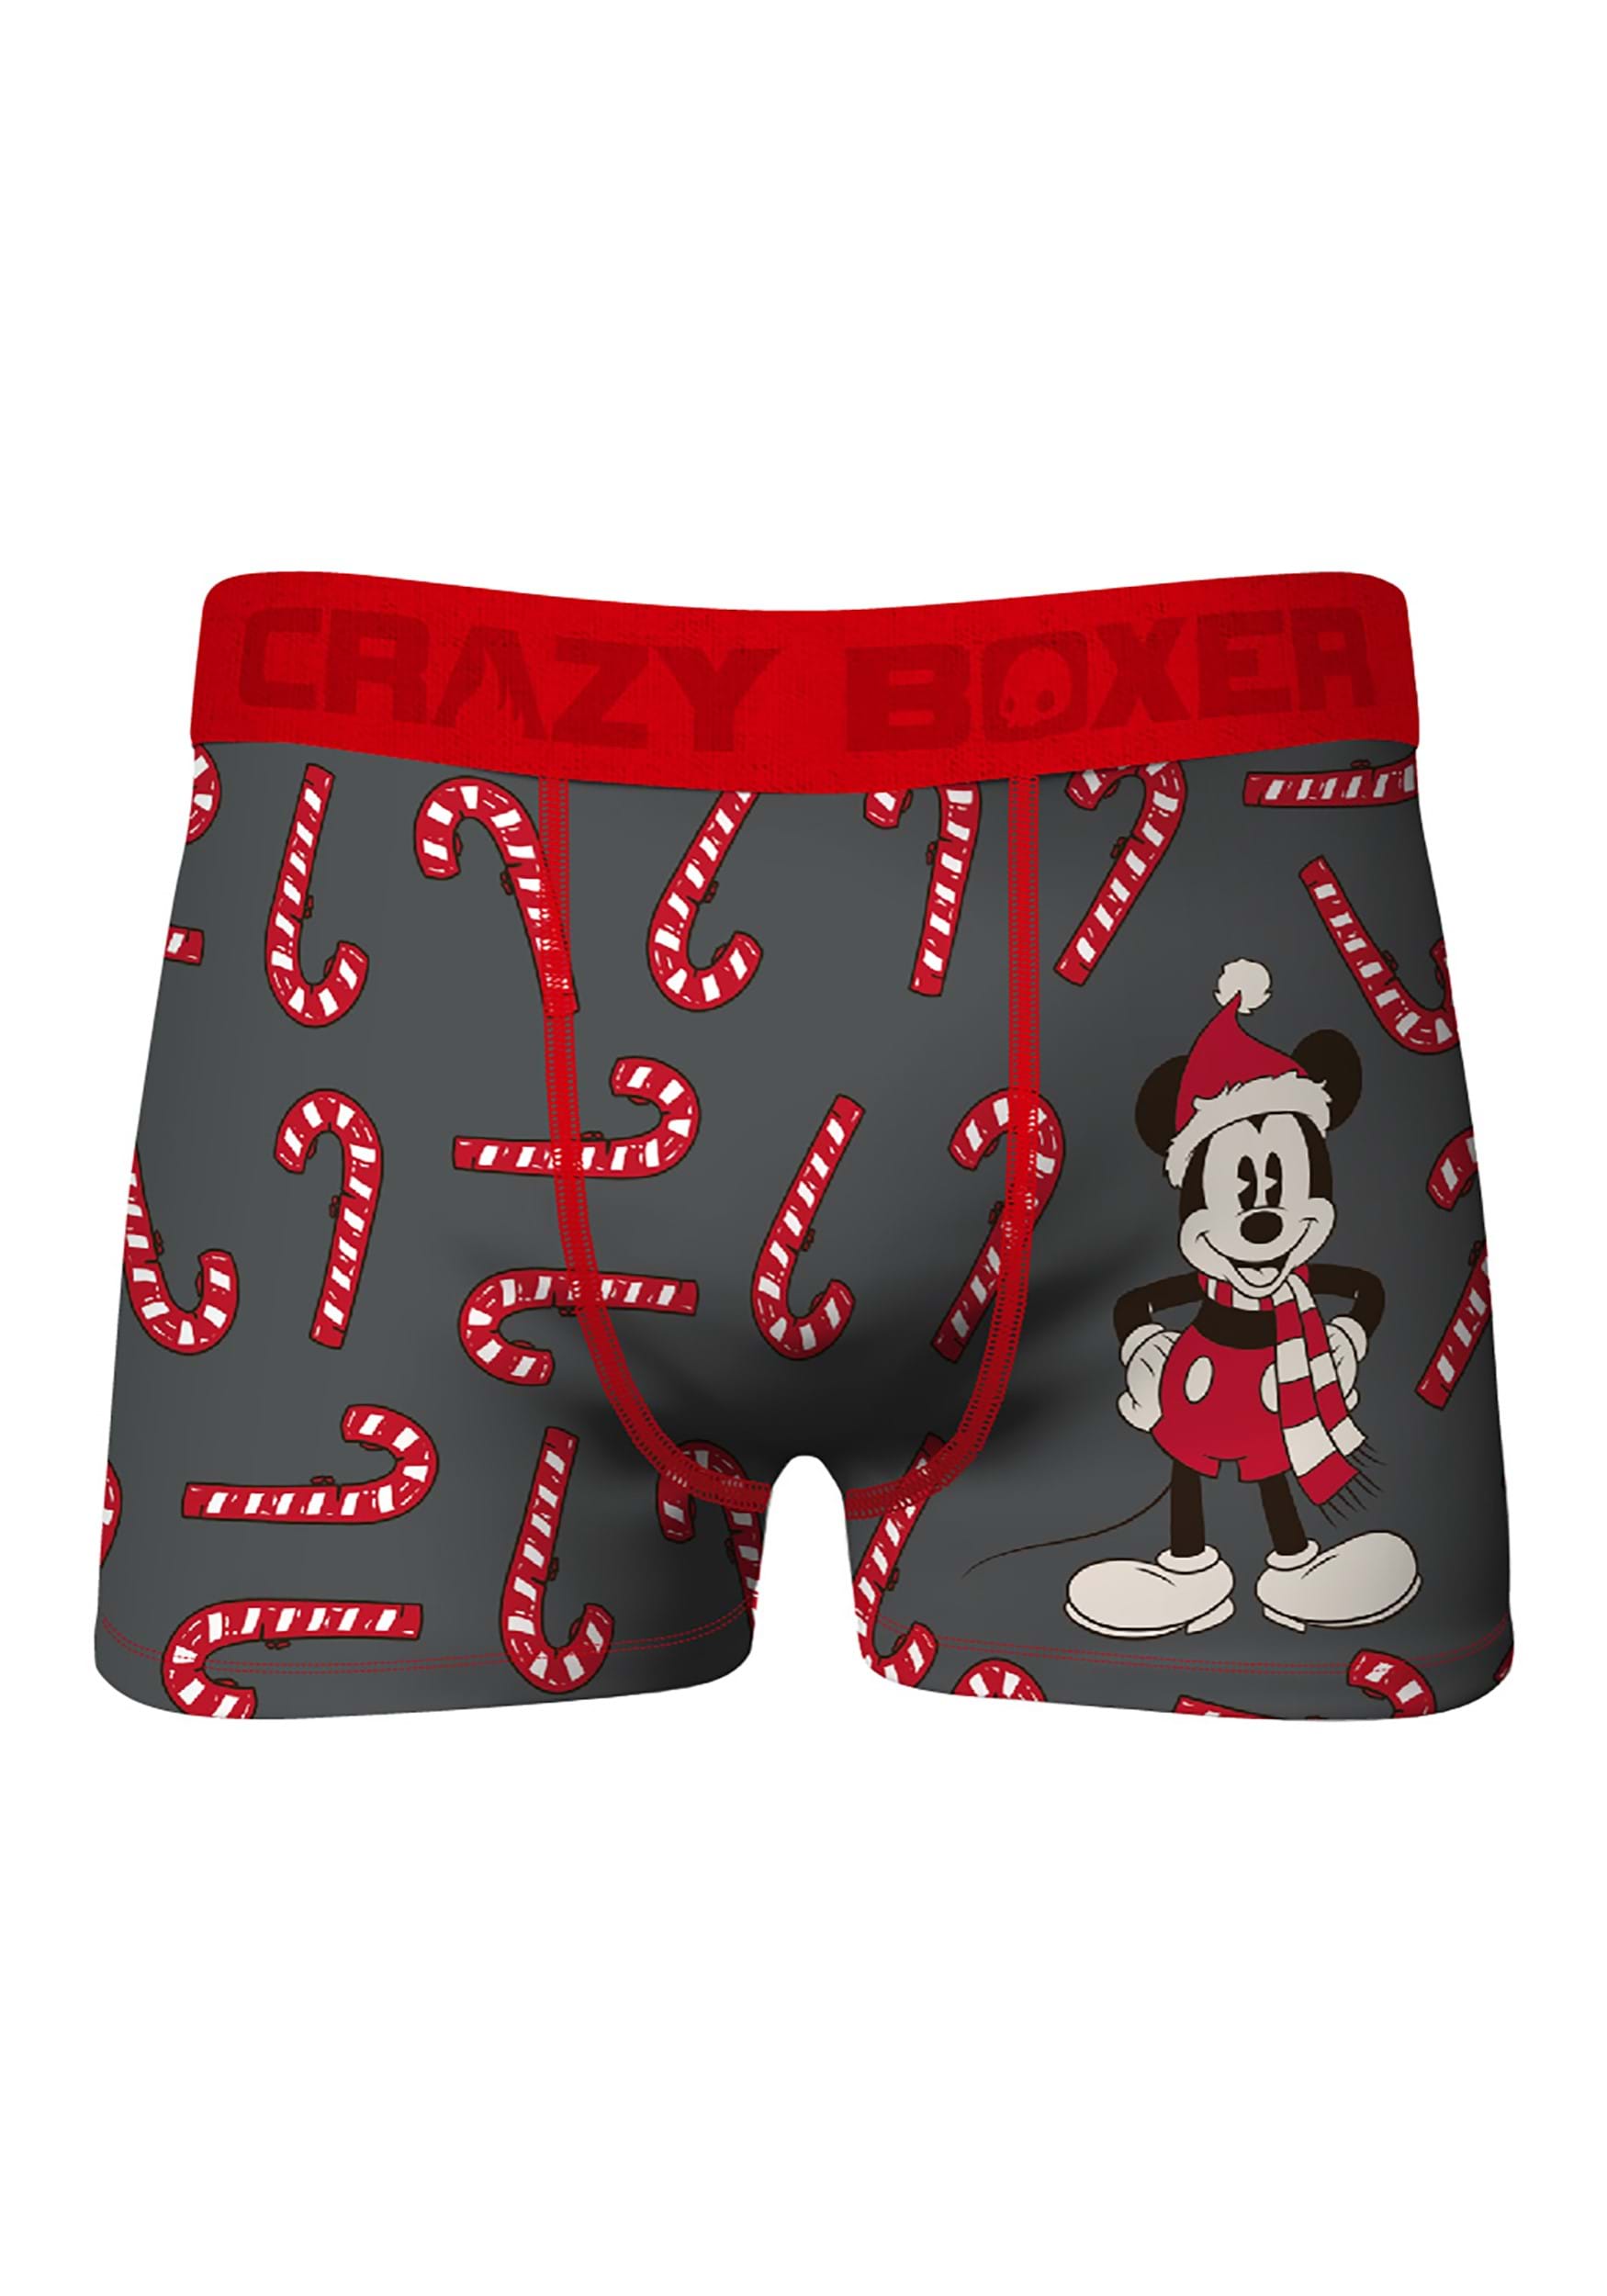 https://images.fun.com/products/70822/2-1-167088/crazy-boxer-mens-holiday-mickey-2-pack-of-boxer-briefs-1.jpg